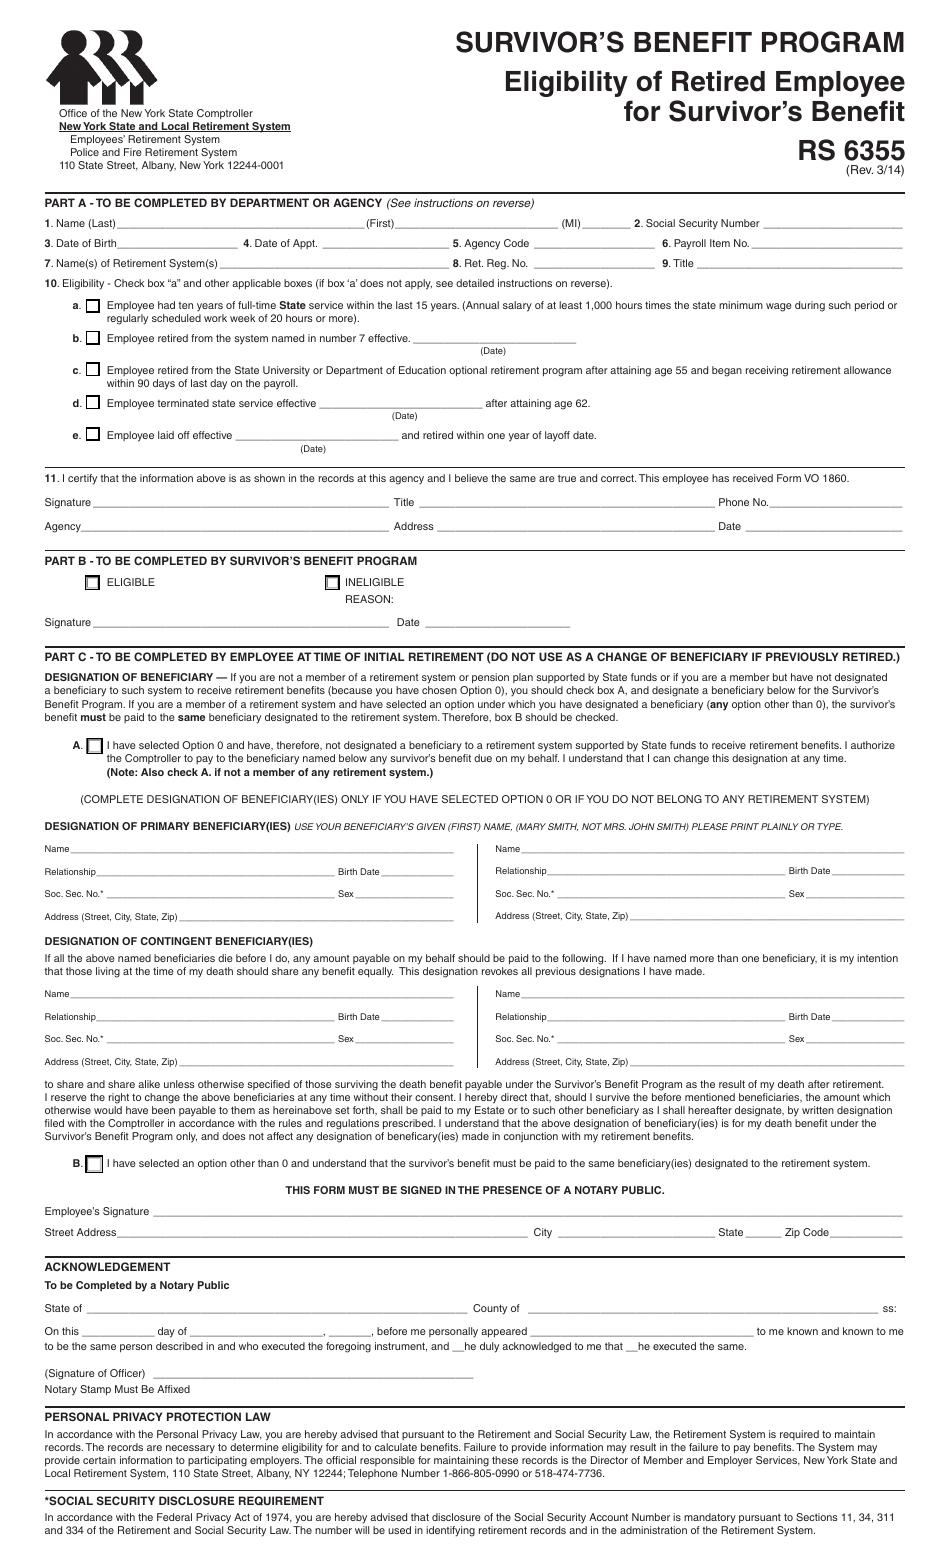 Form RS6355 Survivors Benefit Program Eligibility of Retired Employee for Survivors Benefit - New York, Page 1